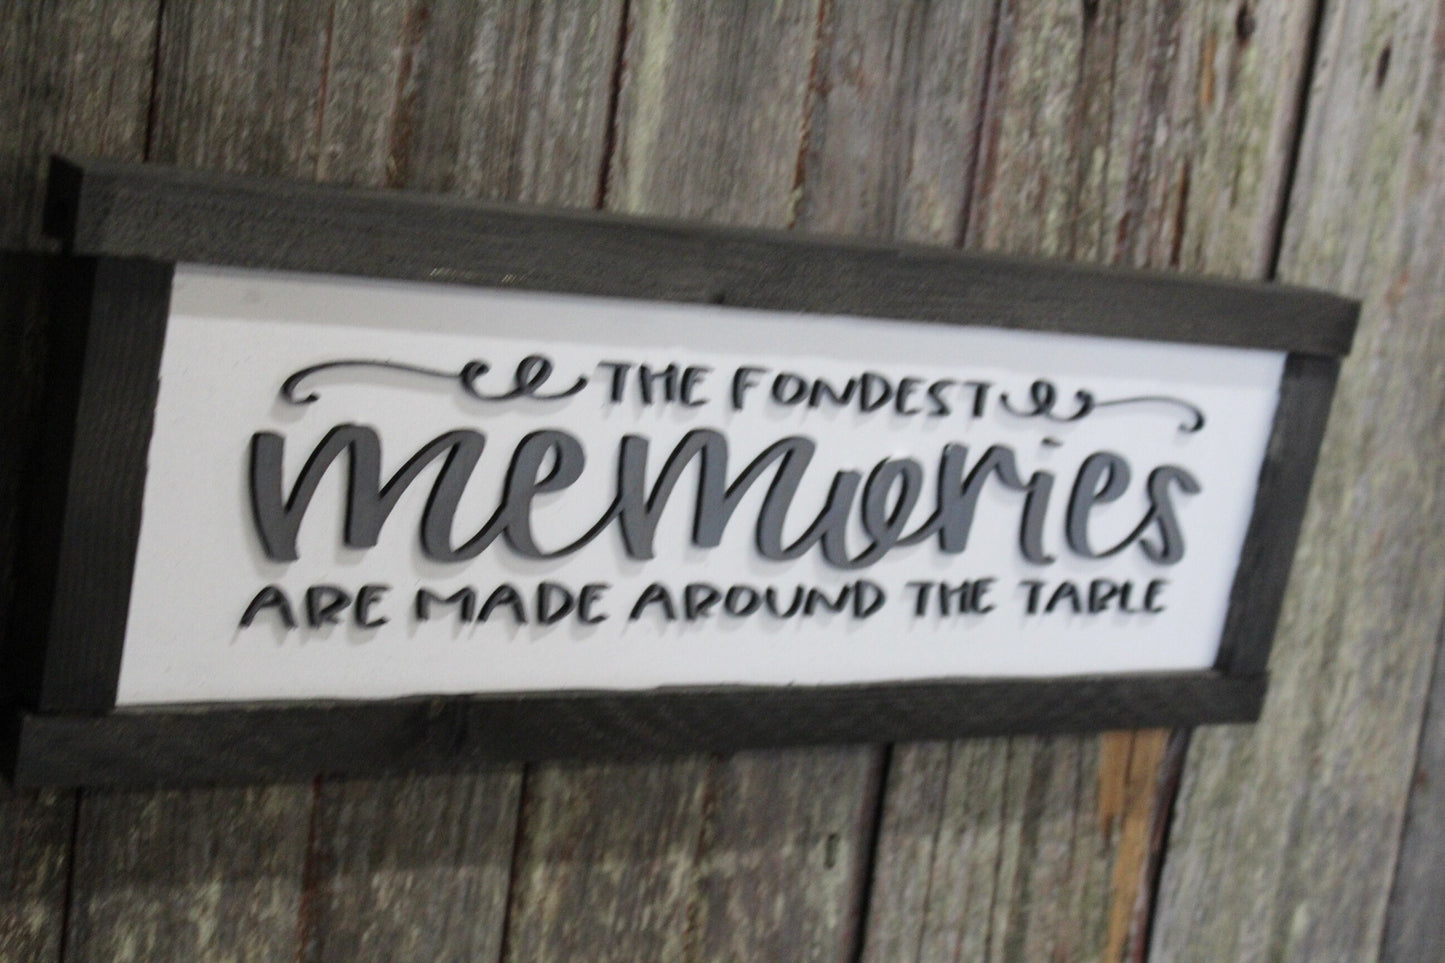 Kitchen Sign Wood Fondest Memories Are Made Around The Table 3D Raised Text Gather Group Family Saying Farmhouse Handmade Rustic Primitive